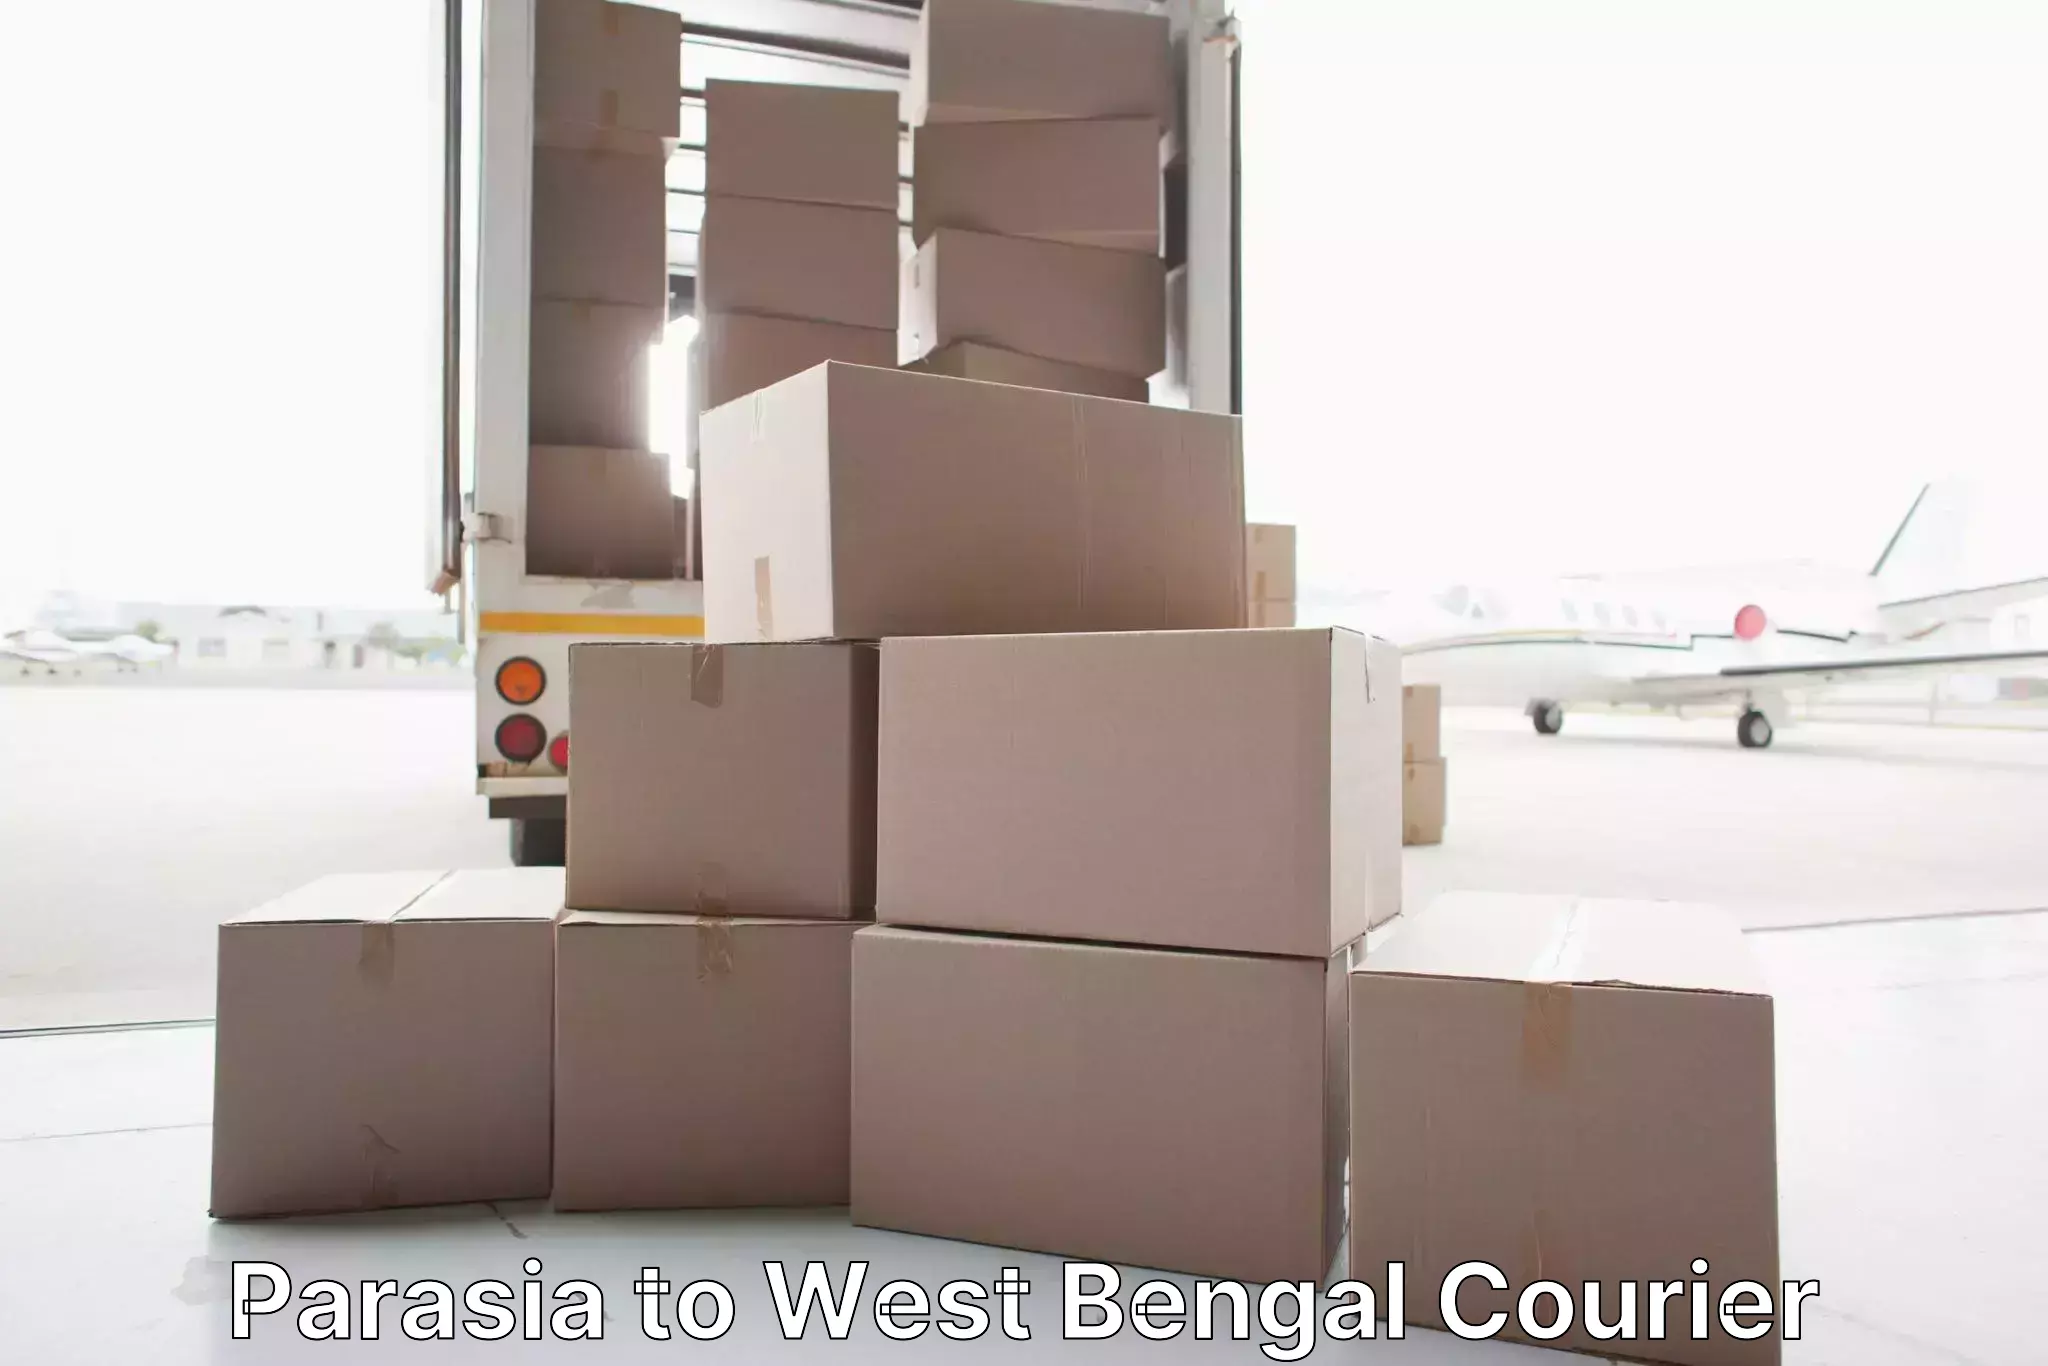 Furniture transport specialists Parasia to West Bengal